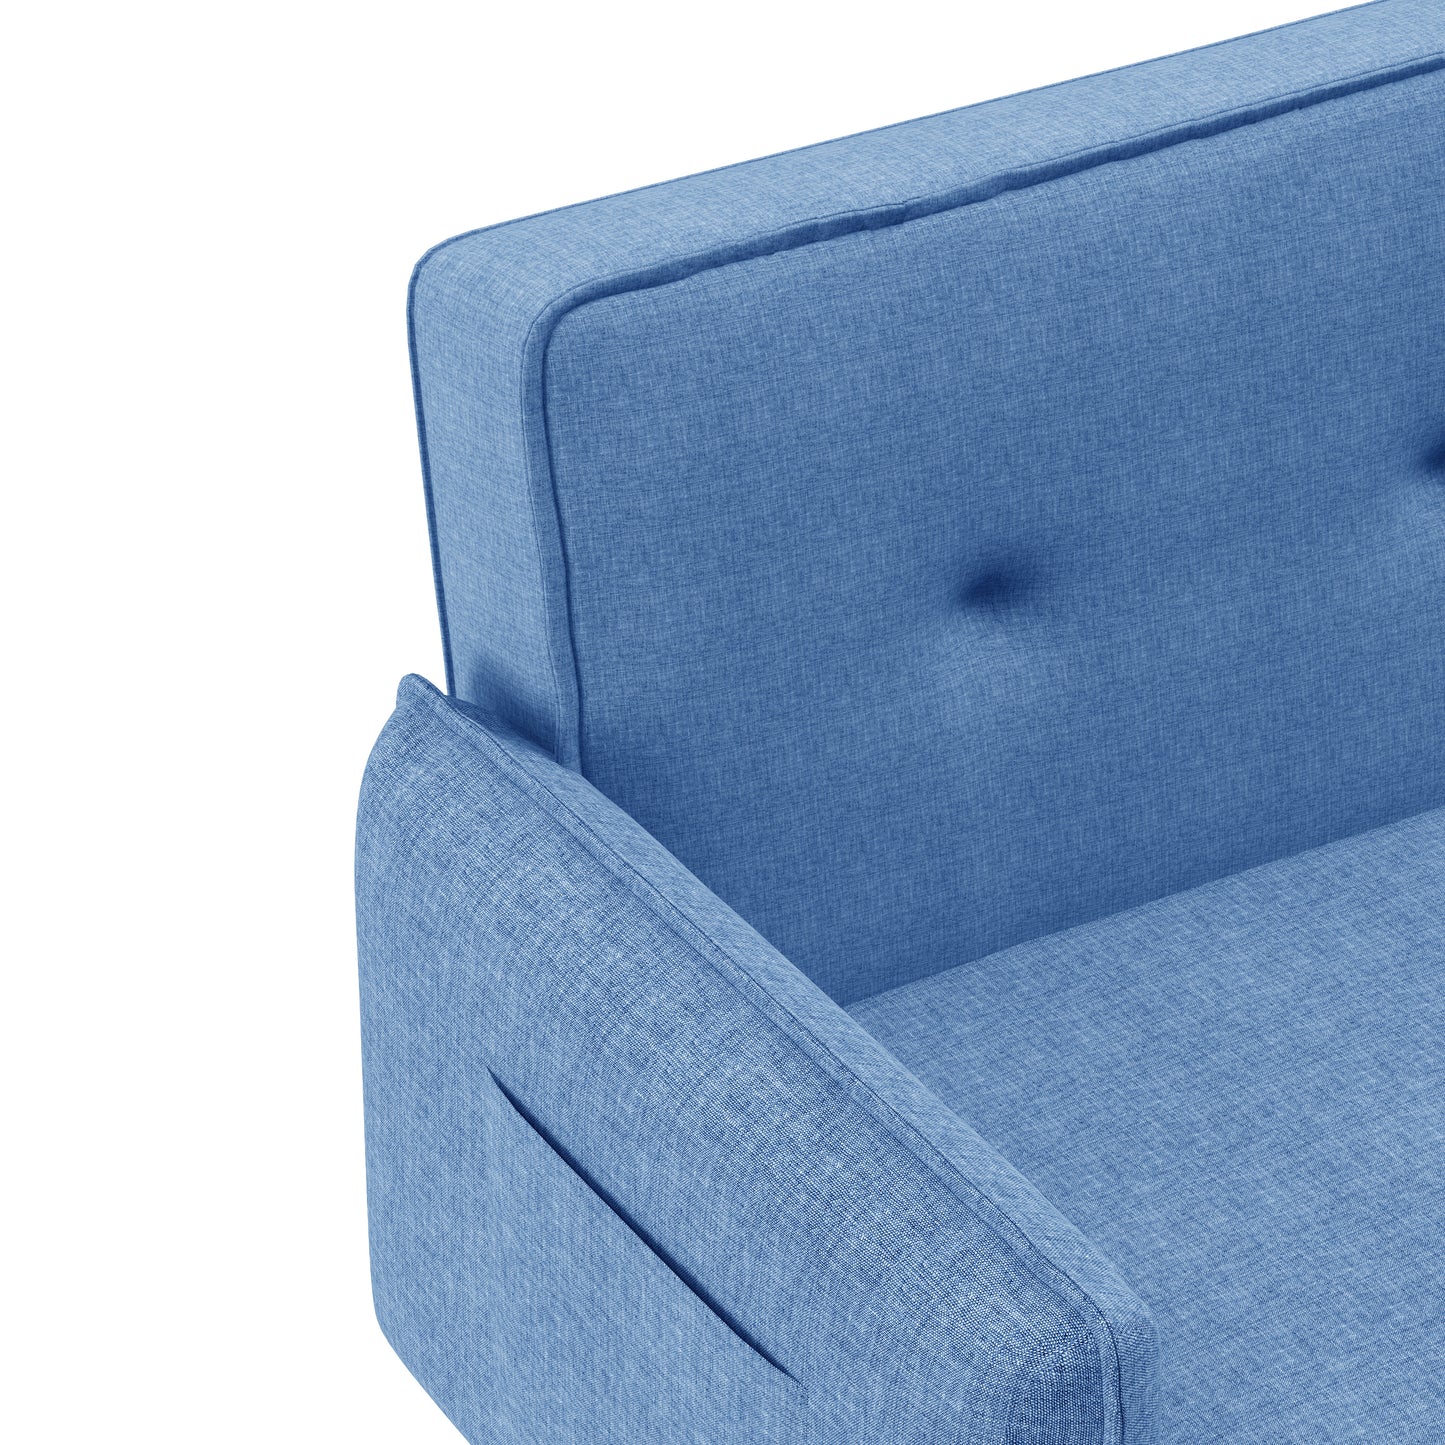 Living Room Leisure Futon Sofa bed in Blue Fabric